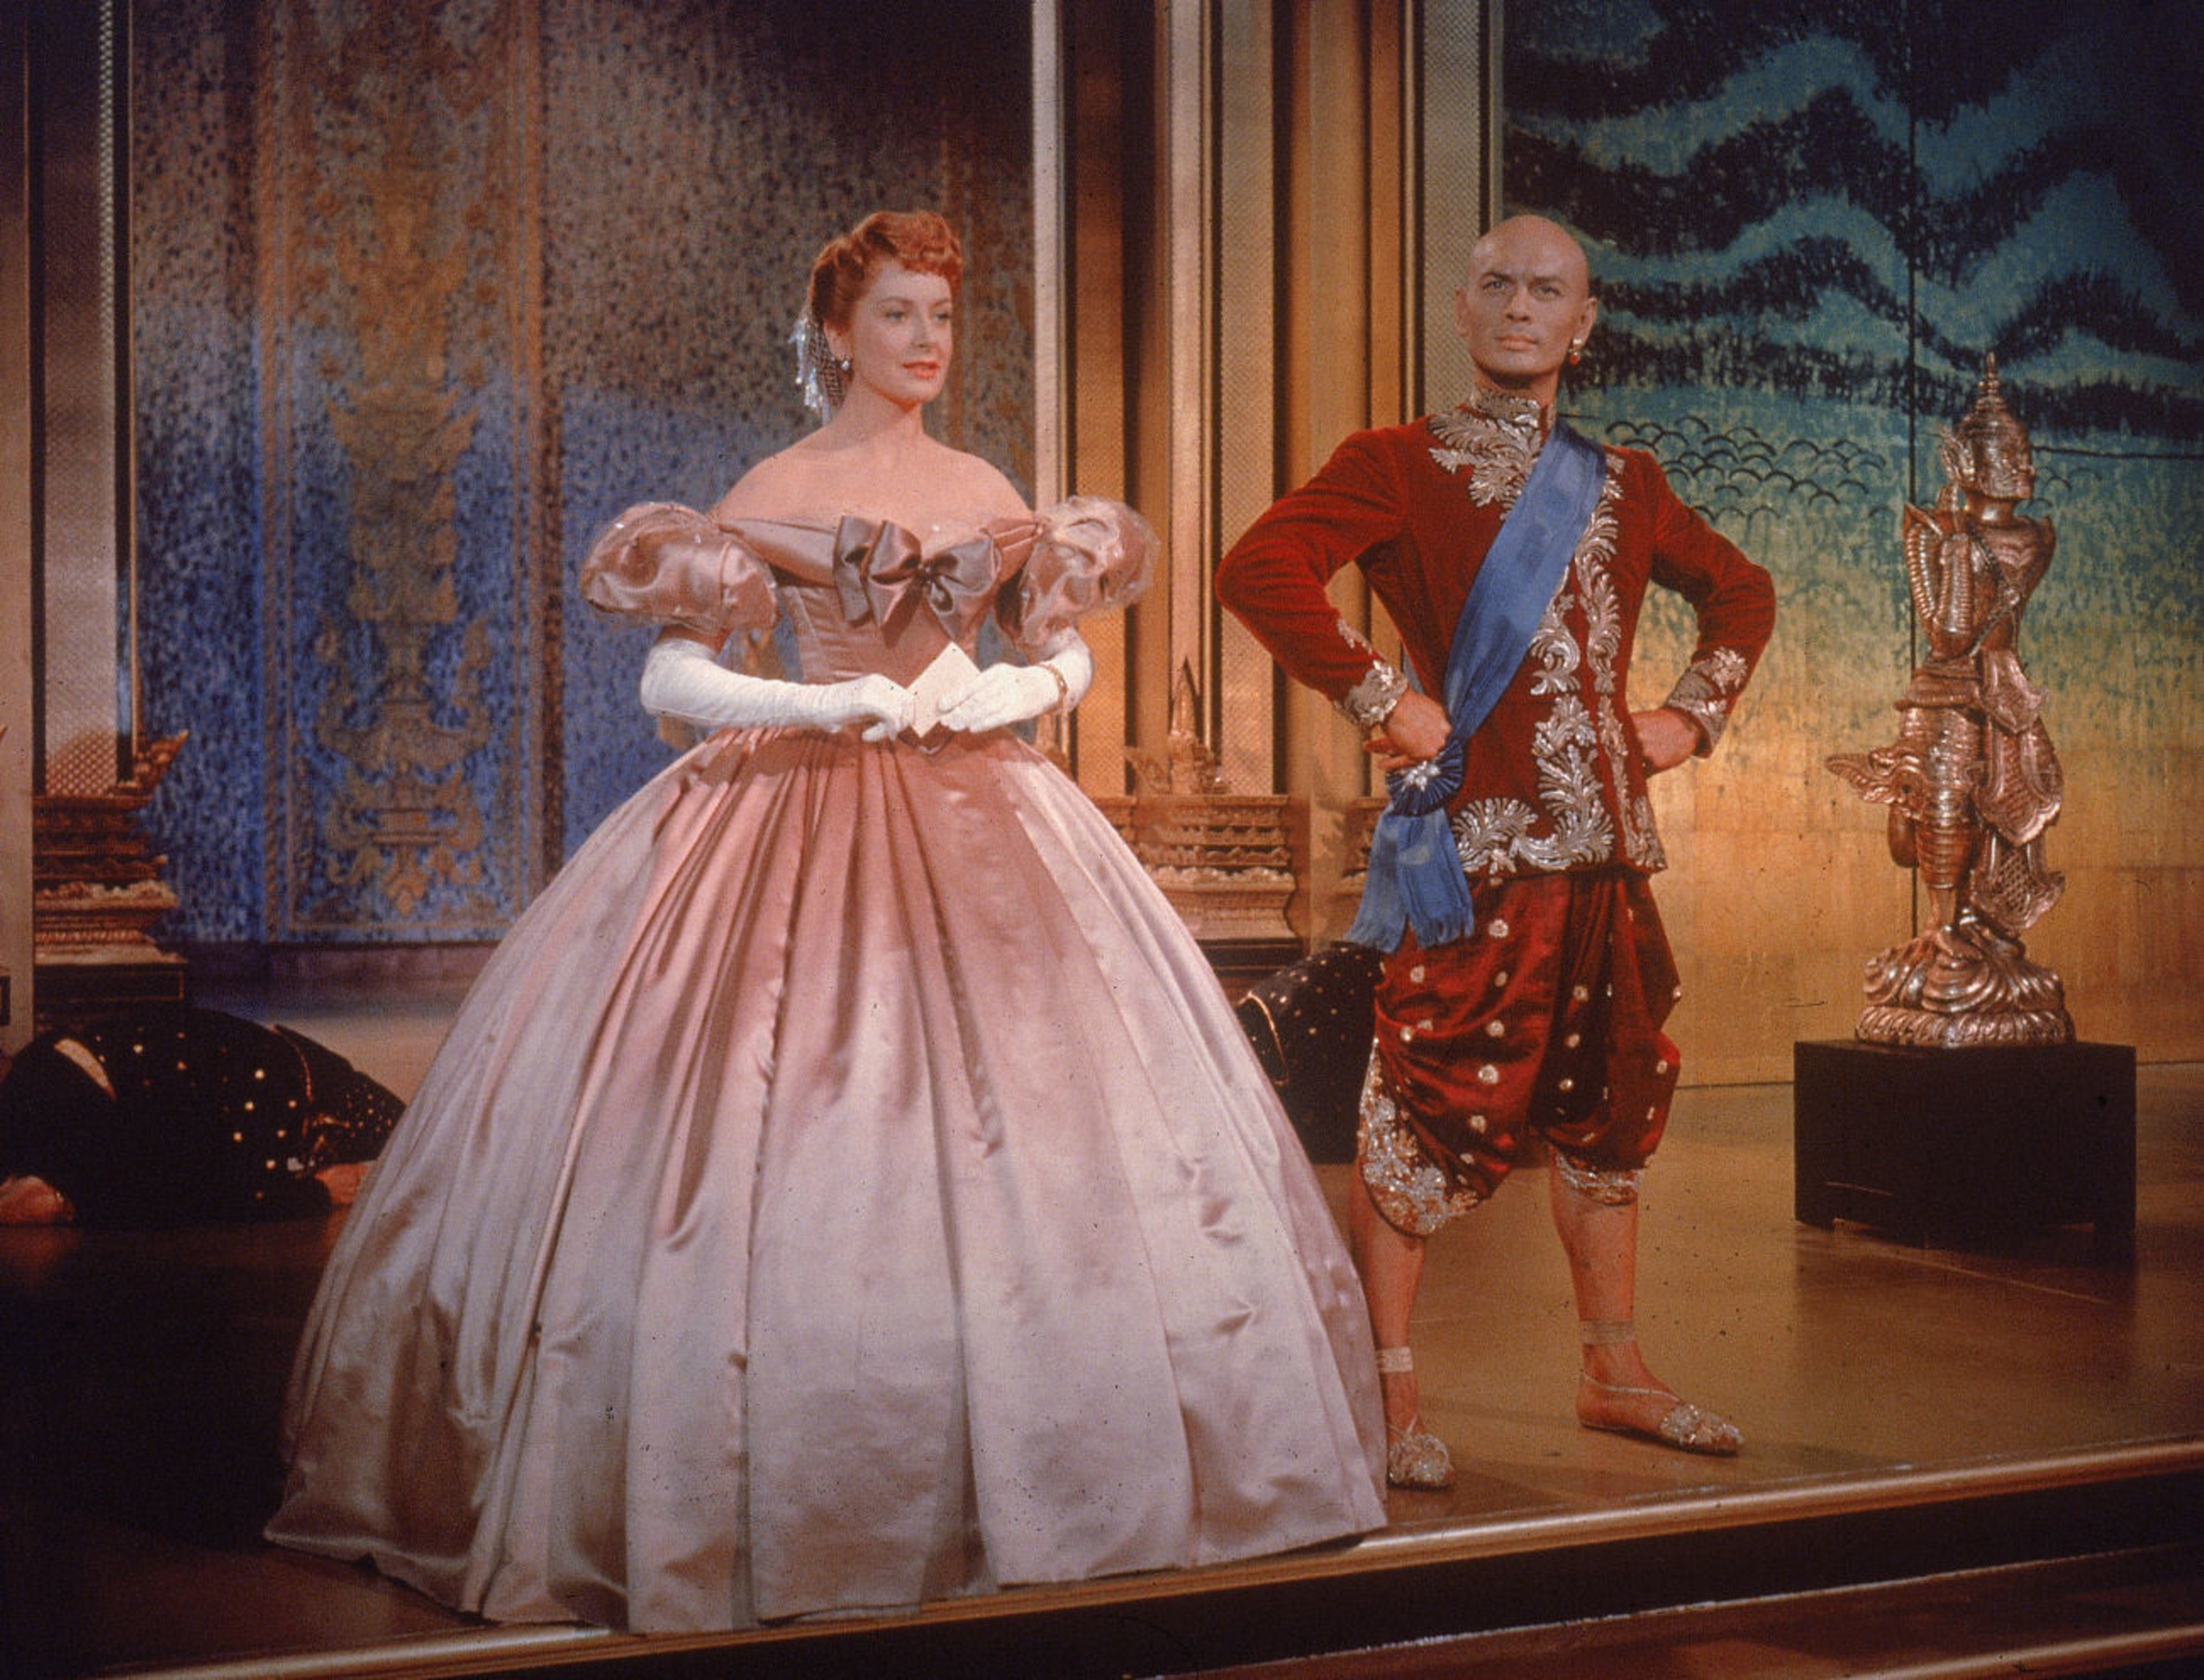 <p>The vast majority of these films are about European royalty or, in this case, non-European royalty through the prism of a white person. <em>The King of I</em> is based on a popular musical. In this version, Yul Brynner (who is very much not Thai) plays the King of Siam, while Deborah Kerr plays Anna.</p><p>You may also like: <a href='https://www.yardbarker.com/entertainment/articles/20_movies_that_are_guaranteed_to_make_you_cry_081723/s1__38945950'>20 movies that are guaranteed to make you cry</a></p>